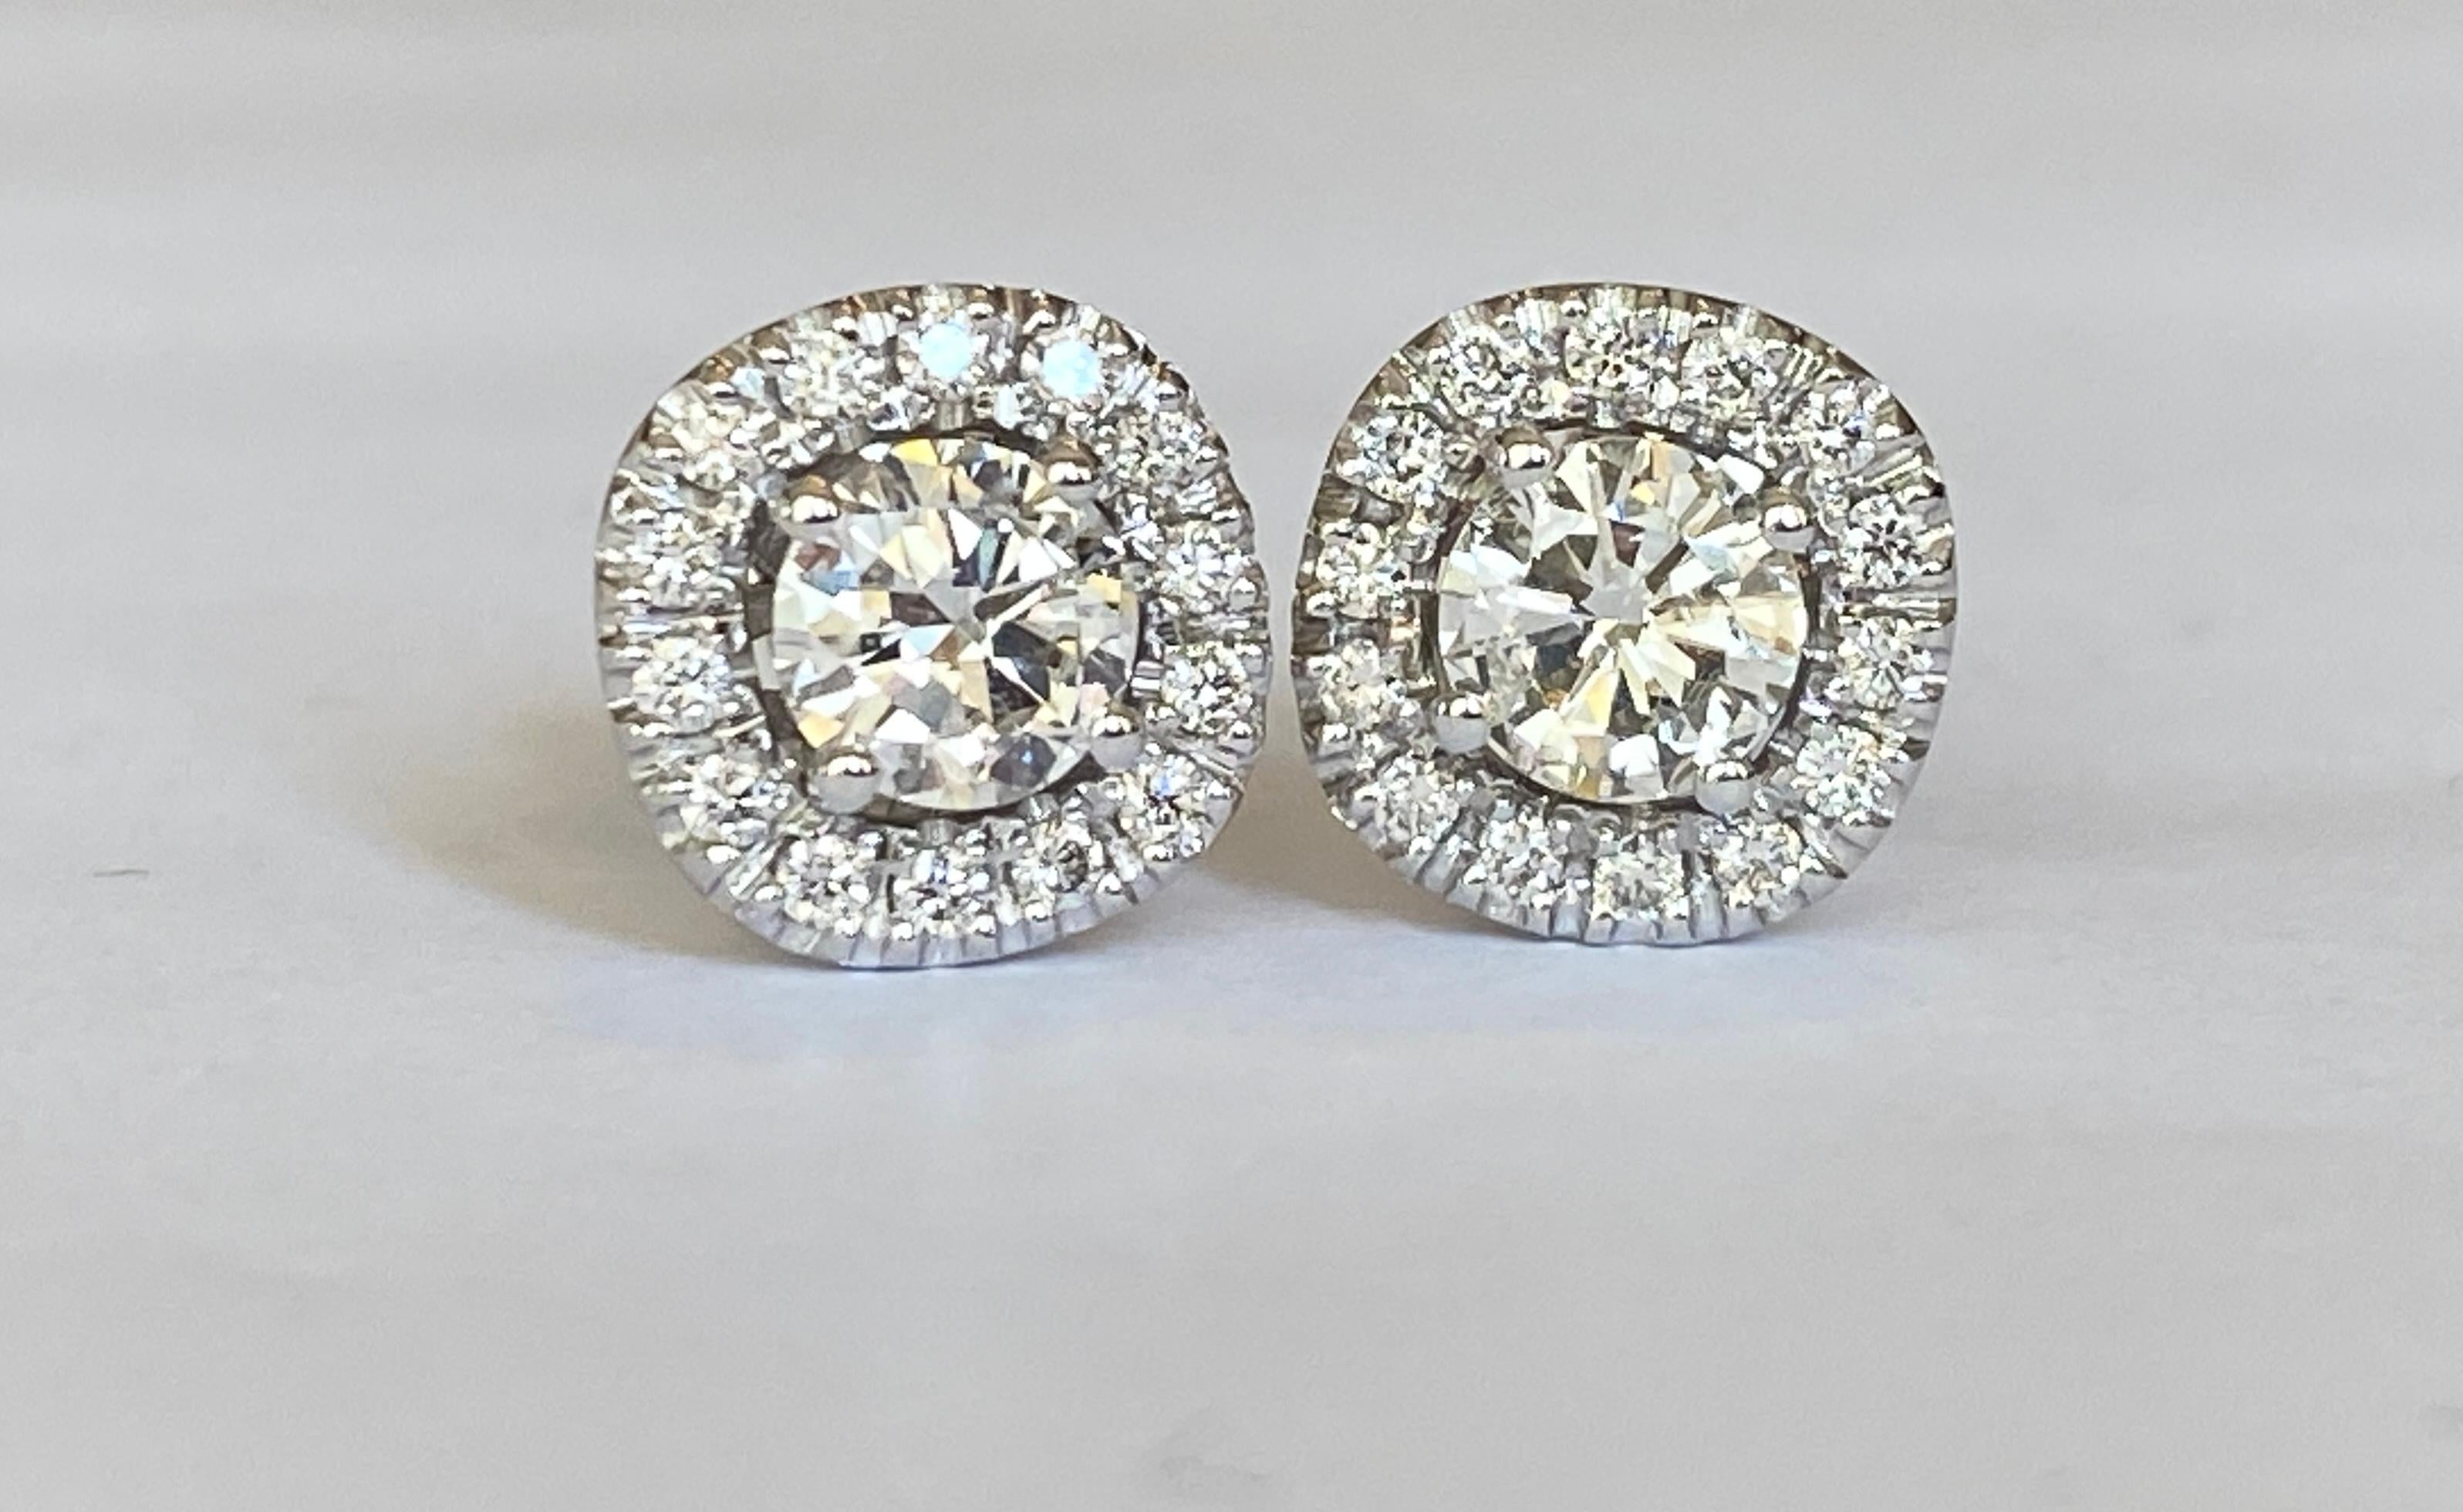 Offered in new condition, a pair of white gold diamond stud earrings set with  2 pieces in the center with a total of 0.80 ct of brilliant cut diamonds of quality  H/VS/P1 and surrounded by 28 pieces of brilliant cut diamonds of approx. 0.25 ct